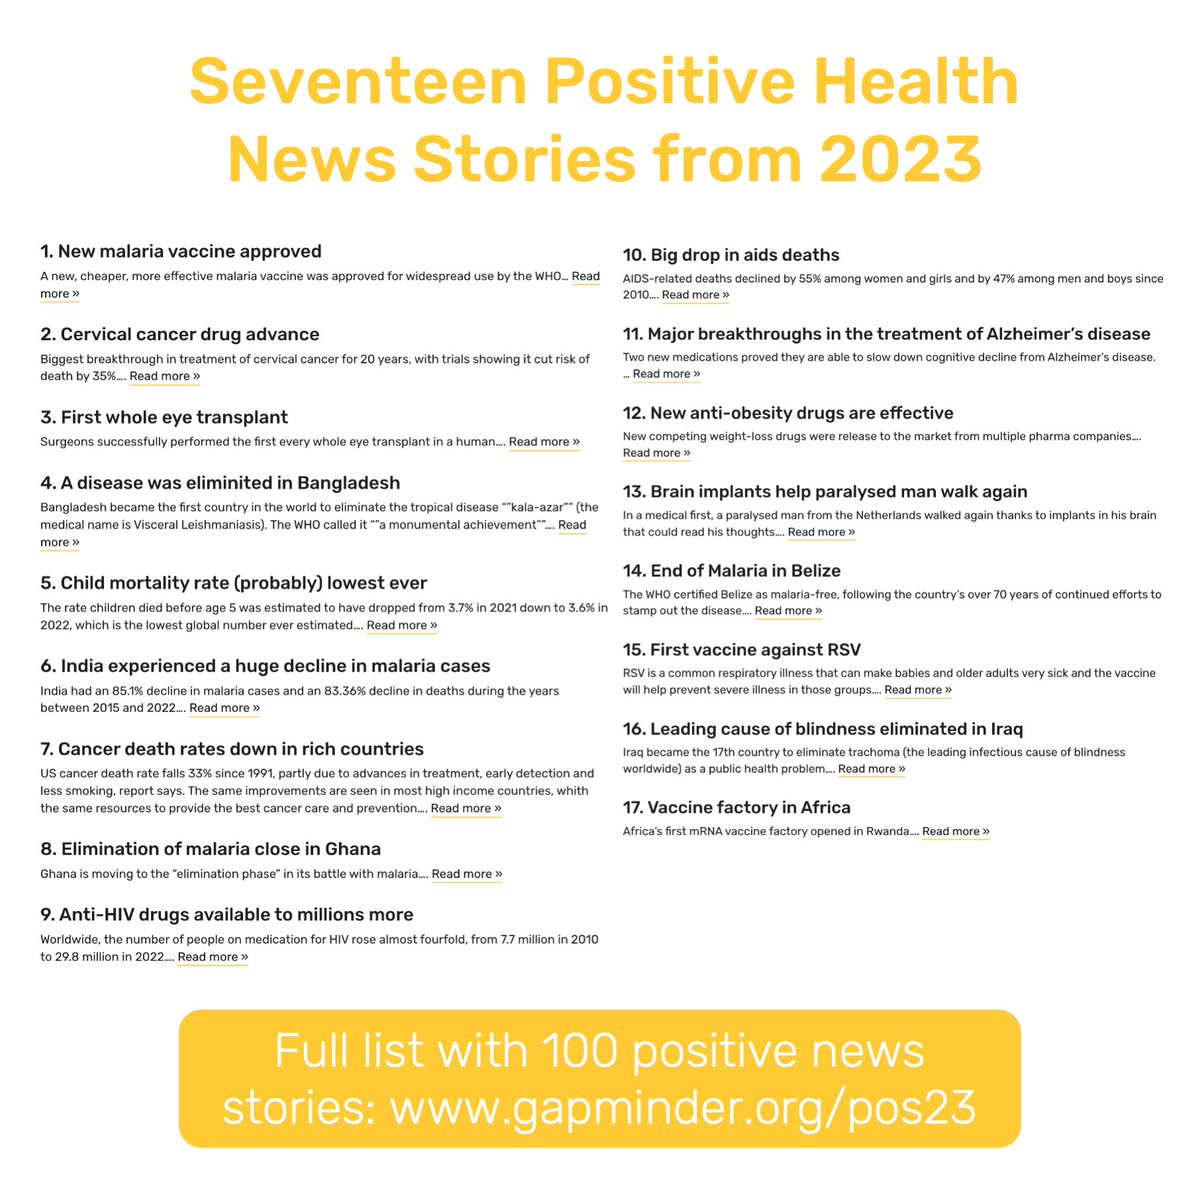 There have been A LOT of extraordinary, groundbreaking developments in health this year. We have compiled some of the most amazing in our list of little known positive news from 2023: gapminder.org/pos23 #positivenews #health